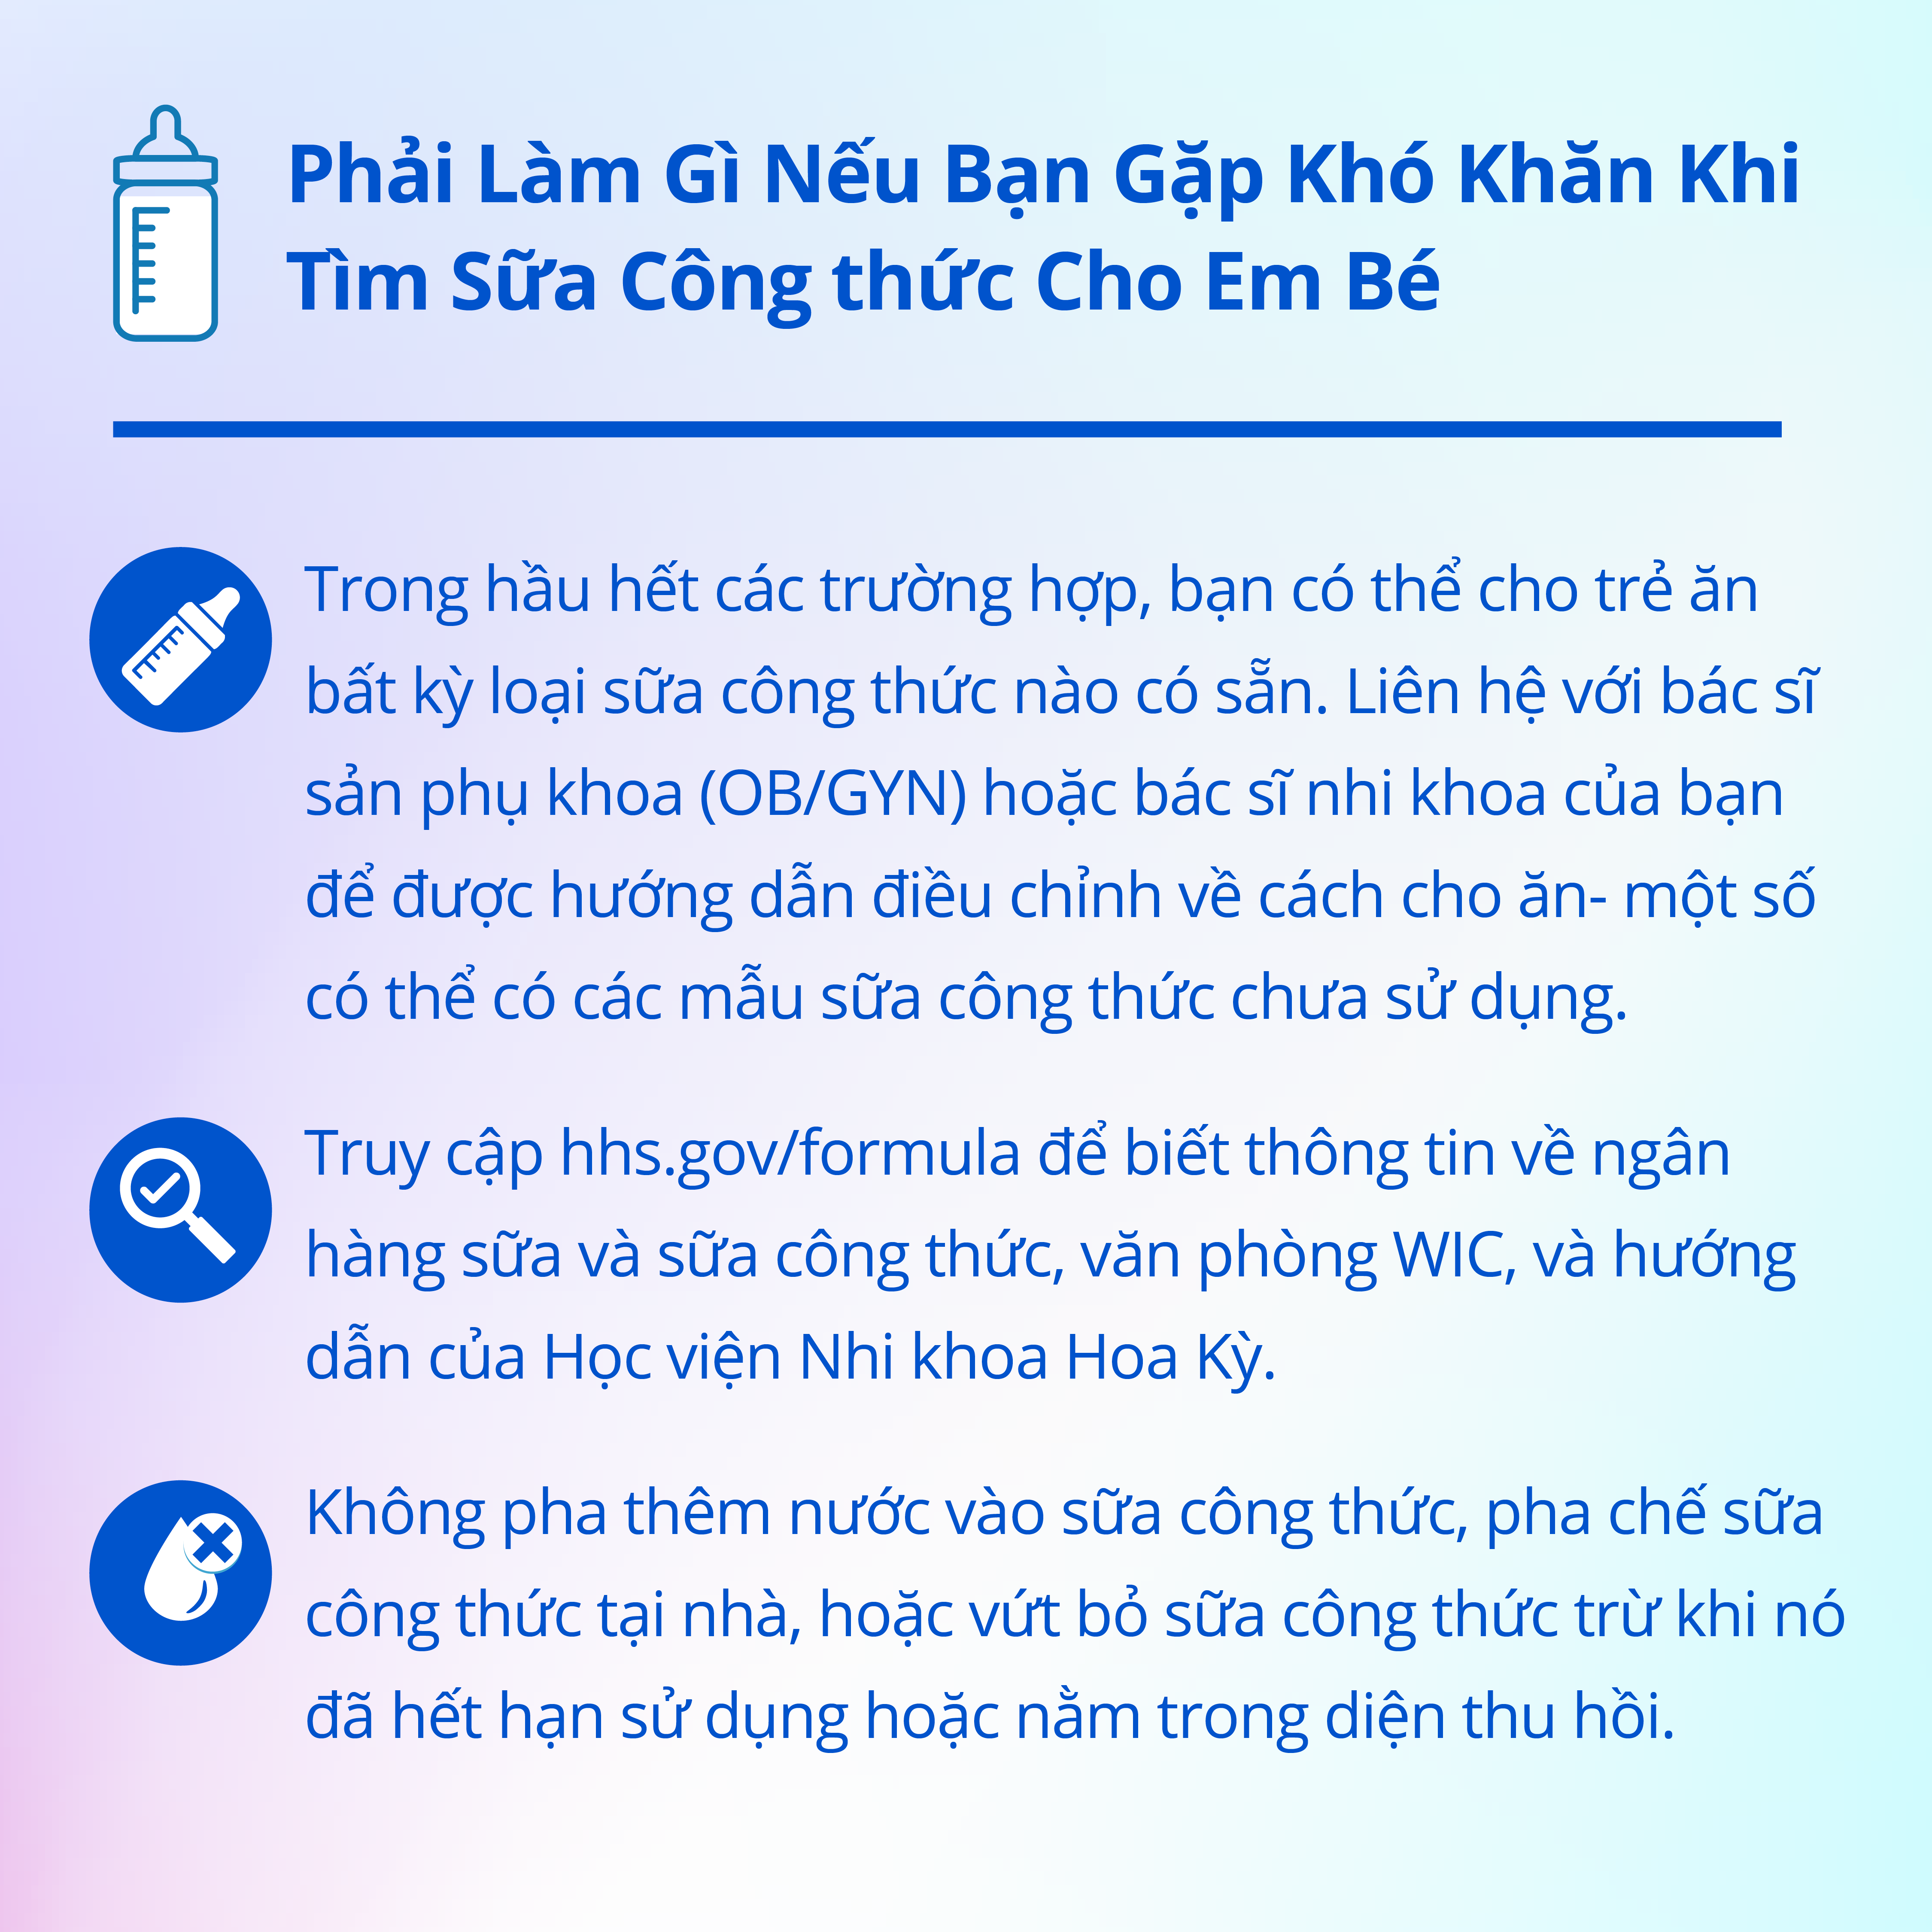 Instagram graphic explaining in Vietnamese what to do if you're having trouble finding baby formula. In most cases, you can feed you baby any brand of formula that is available. Contact your OB/GYN or pediatrician for guidance on adjusting feeding practices - some may have unused formula samples. Second, visit hhs.gov/formula for information on milk and formula banks, WIC offices, and guidance from the American Academy of Pediatrics. Third, do not water down formula, make formula at home, or discard formula unless it is expired or is part of the recall.